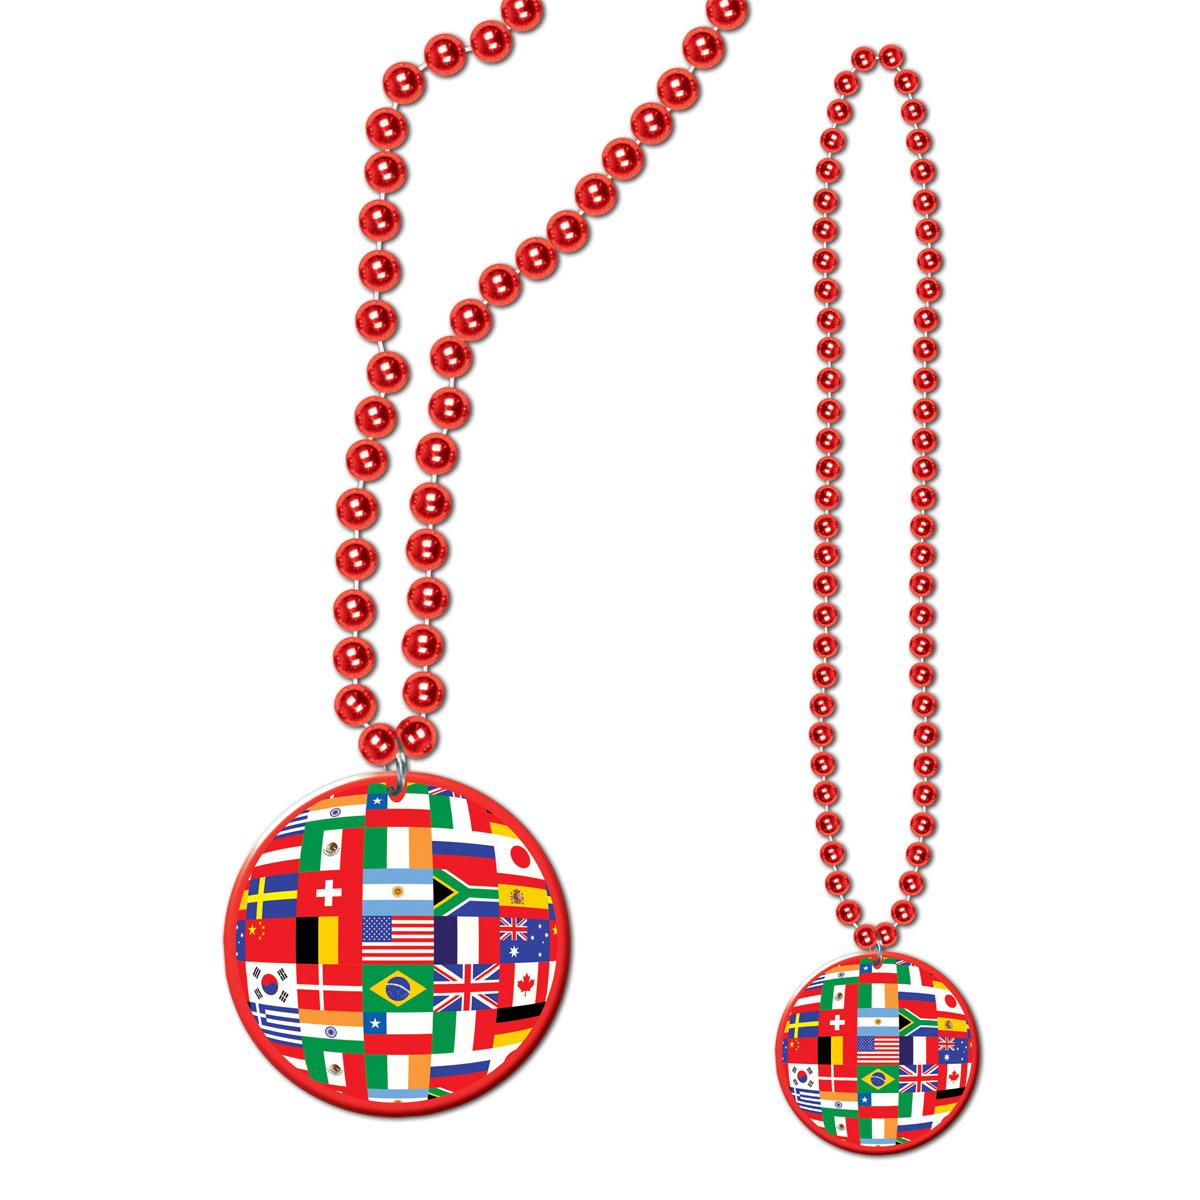 Beistle Party Bead Necklaces with International Flag Medallion